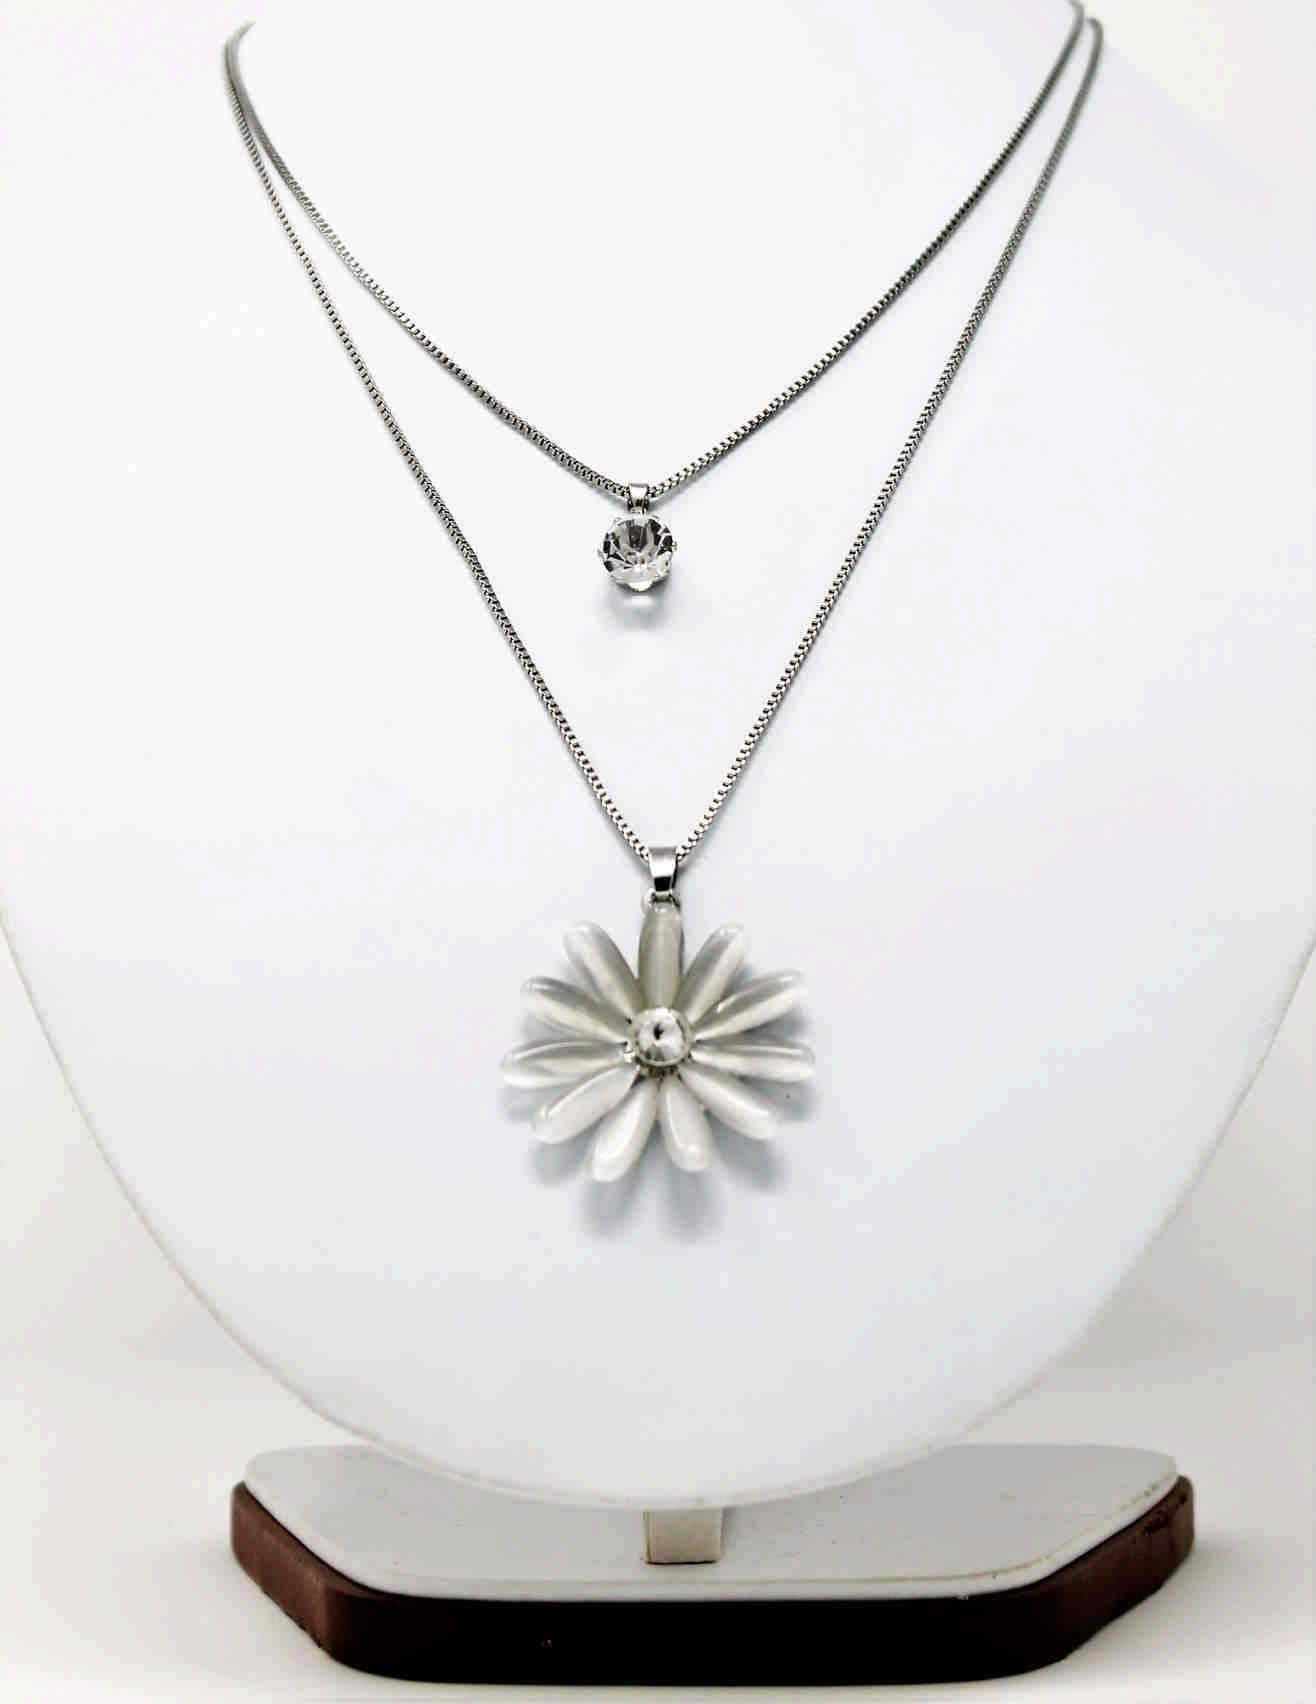 Indian Petals Rhinestones Studded Floral Design Imitation Fashion Metal Double Pendant with Long Chain for Girls